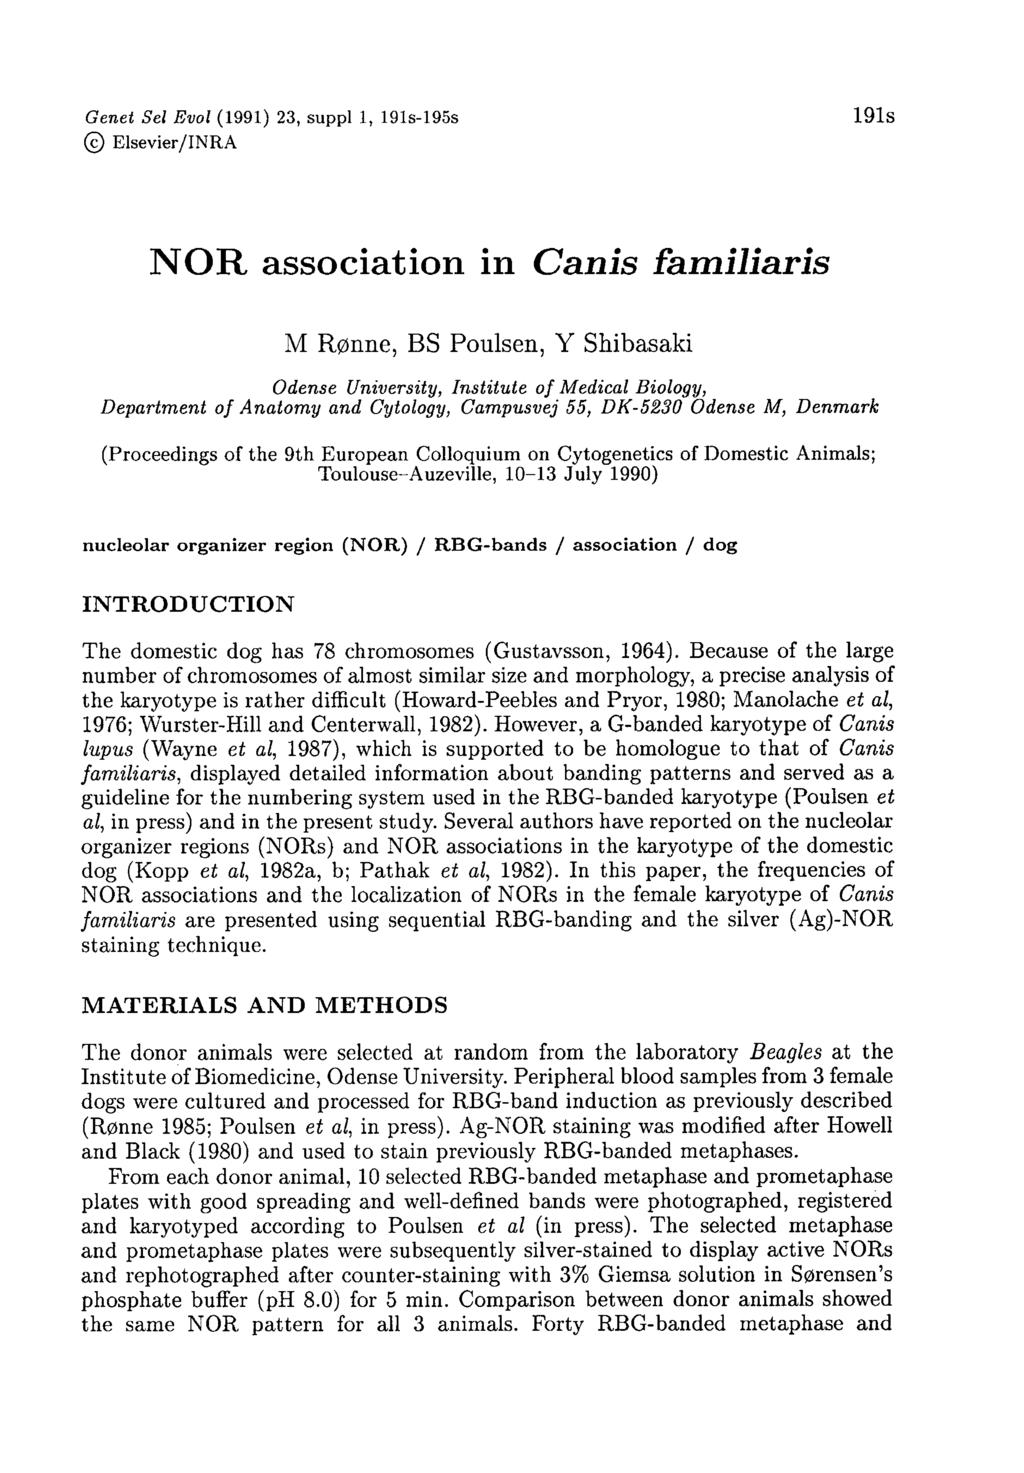 NOR association in Canis familiaris M Rønne, BS Poulsen, Y Shibasaki Odense University, Institute of Medical Biology, Department of Anatomy and Cytology, Campusvej 55, DK-5230 Odense M, Denmark